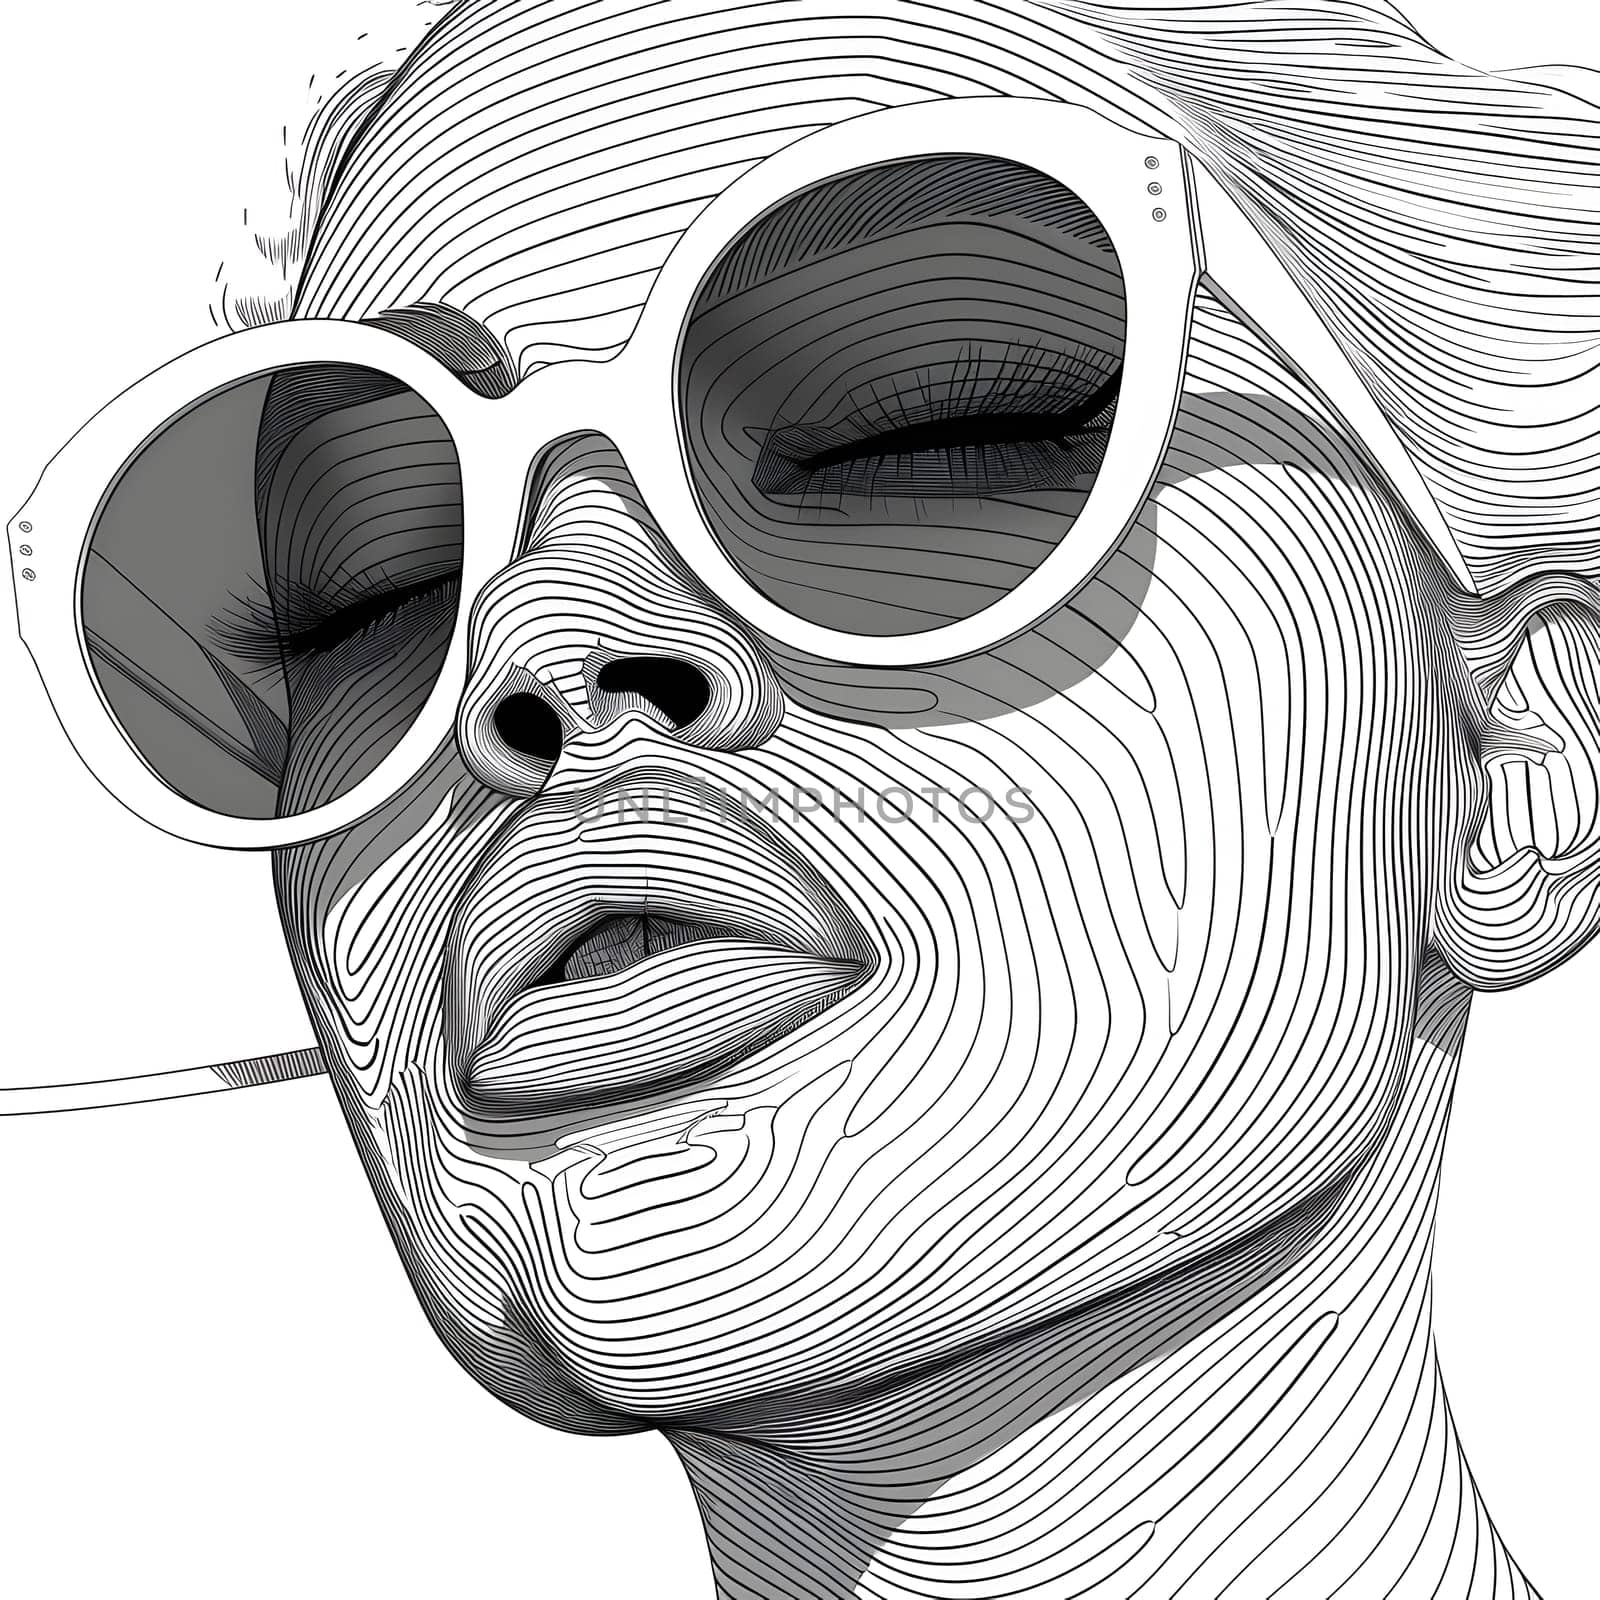 Monochrome sketch of a woman in sunglasses with striking facial expression by Nadtochiy